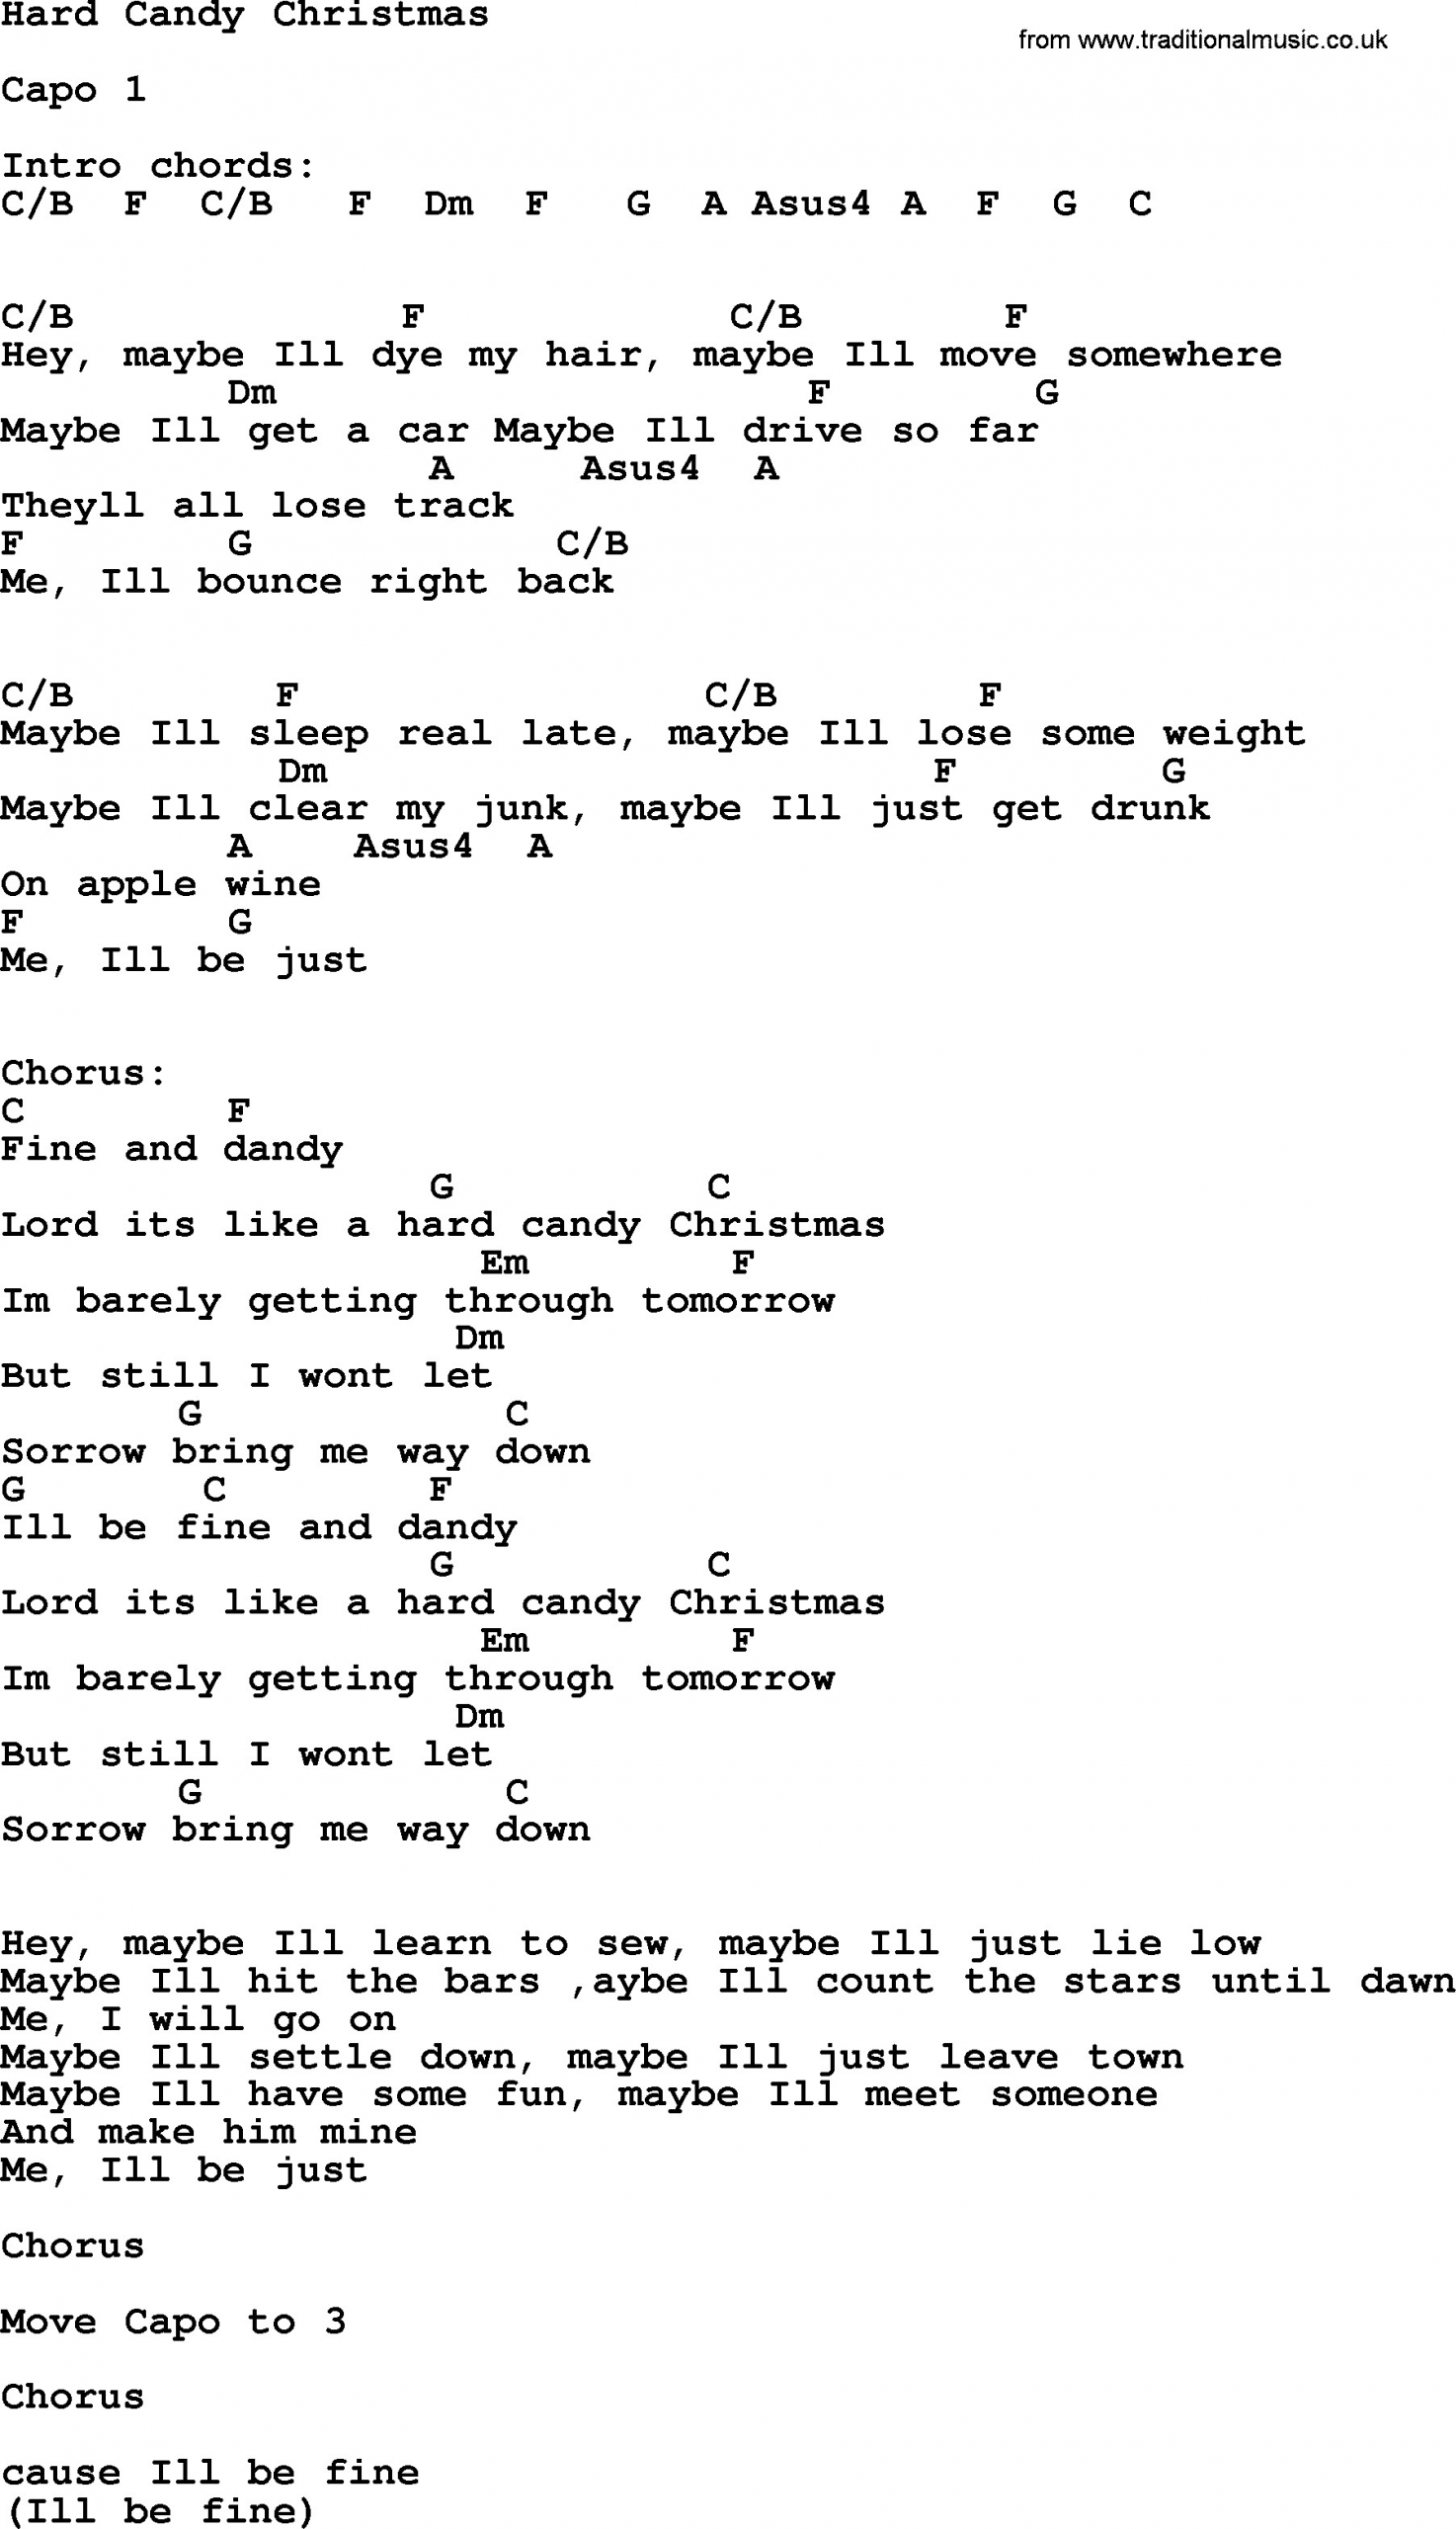 Hard Candy Christmas By Dolly Parton
 Dolly Parton song Hard Candy Christmas lyrics and chords